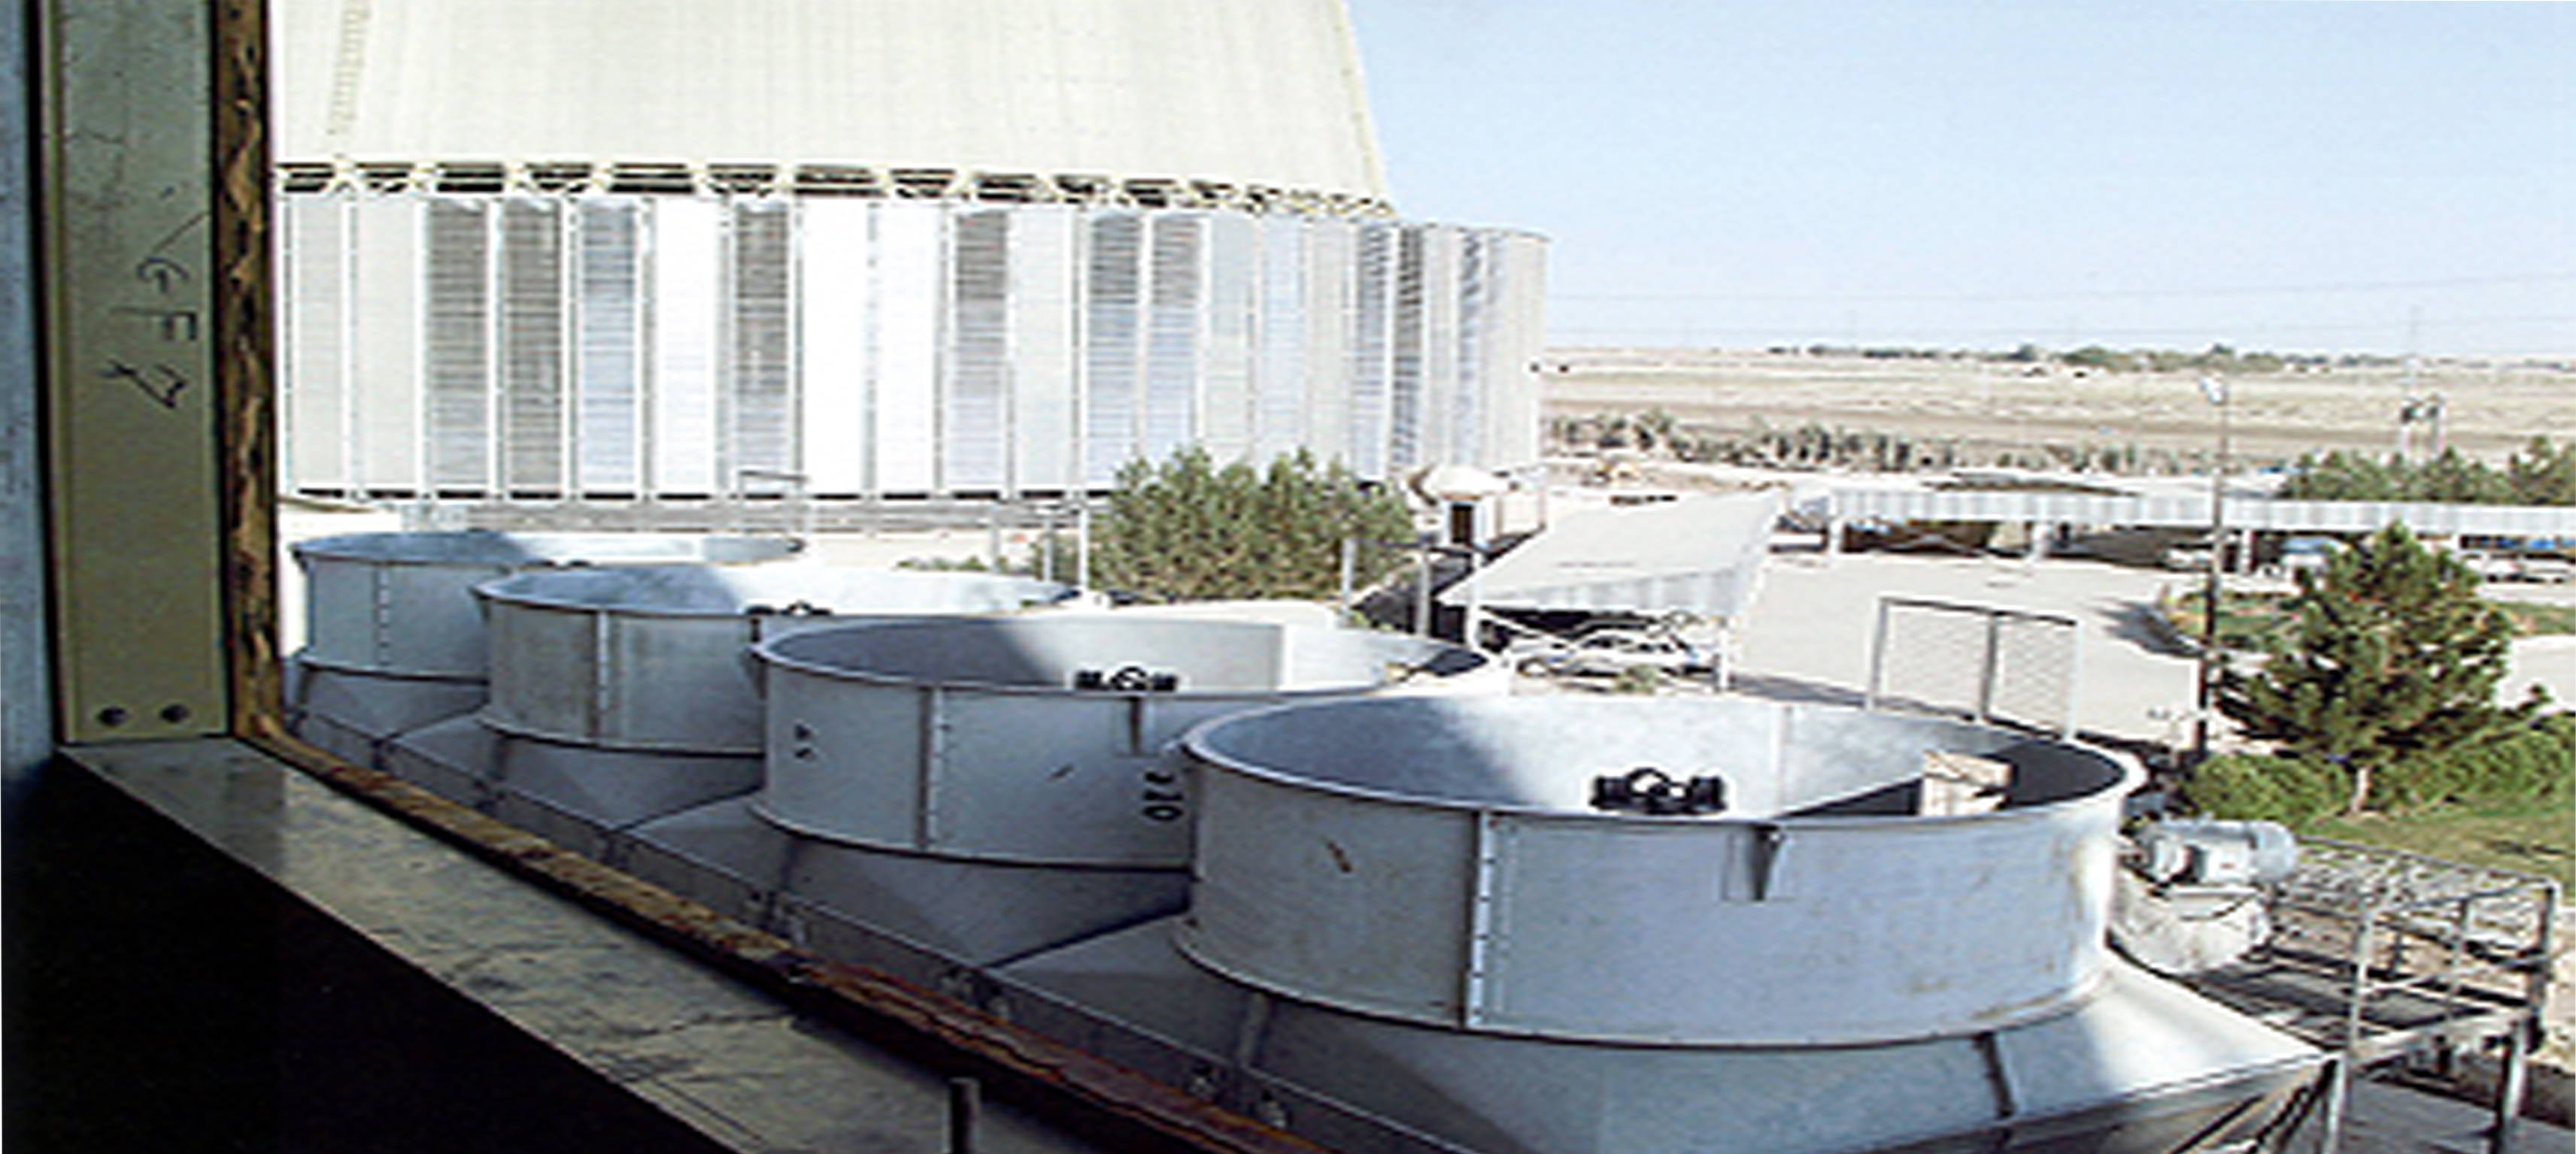 Cooling System of Shari’ati Power Plant